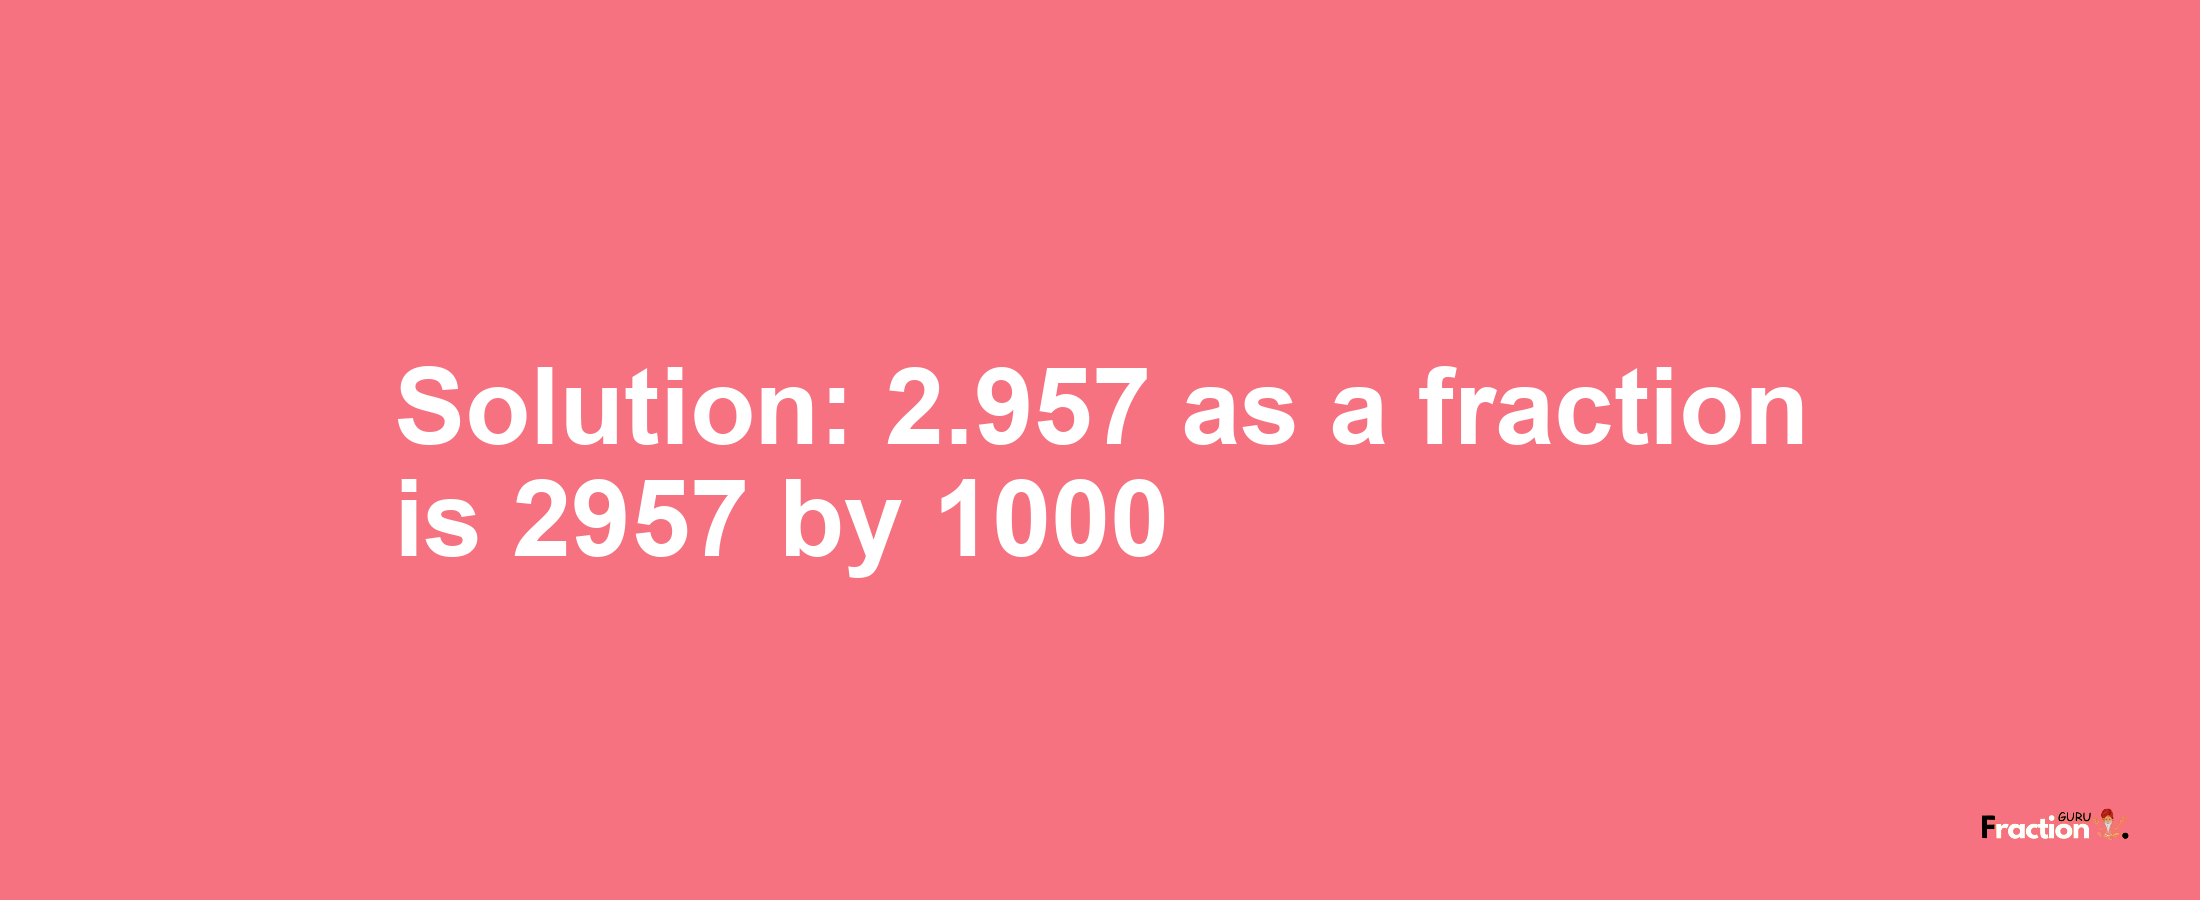 Solution:2.957 as a fraction is 2957/1000